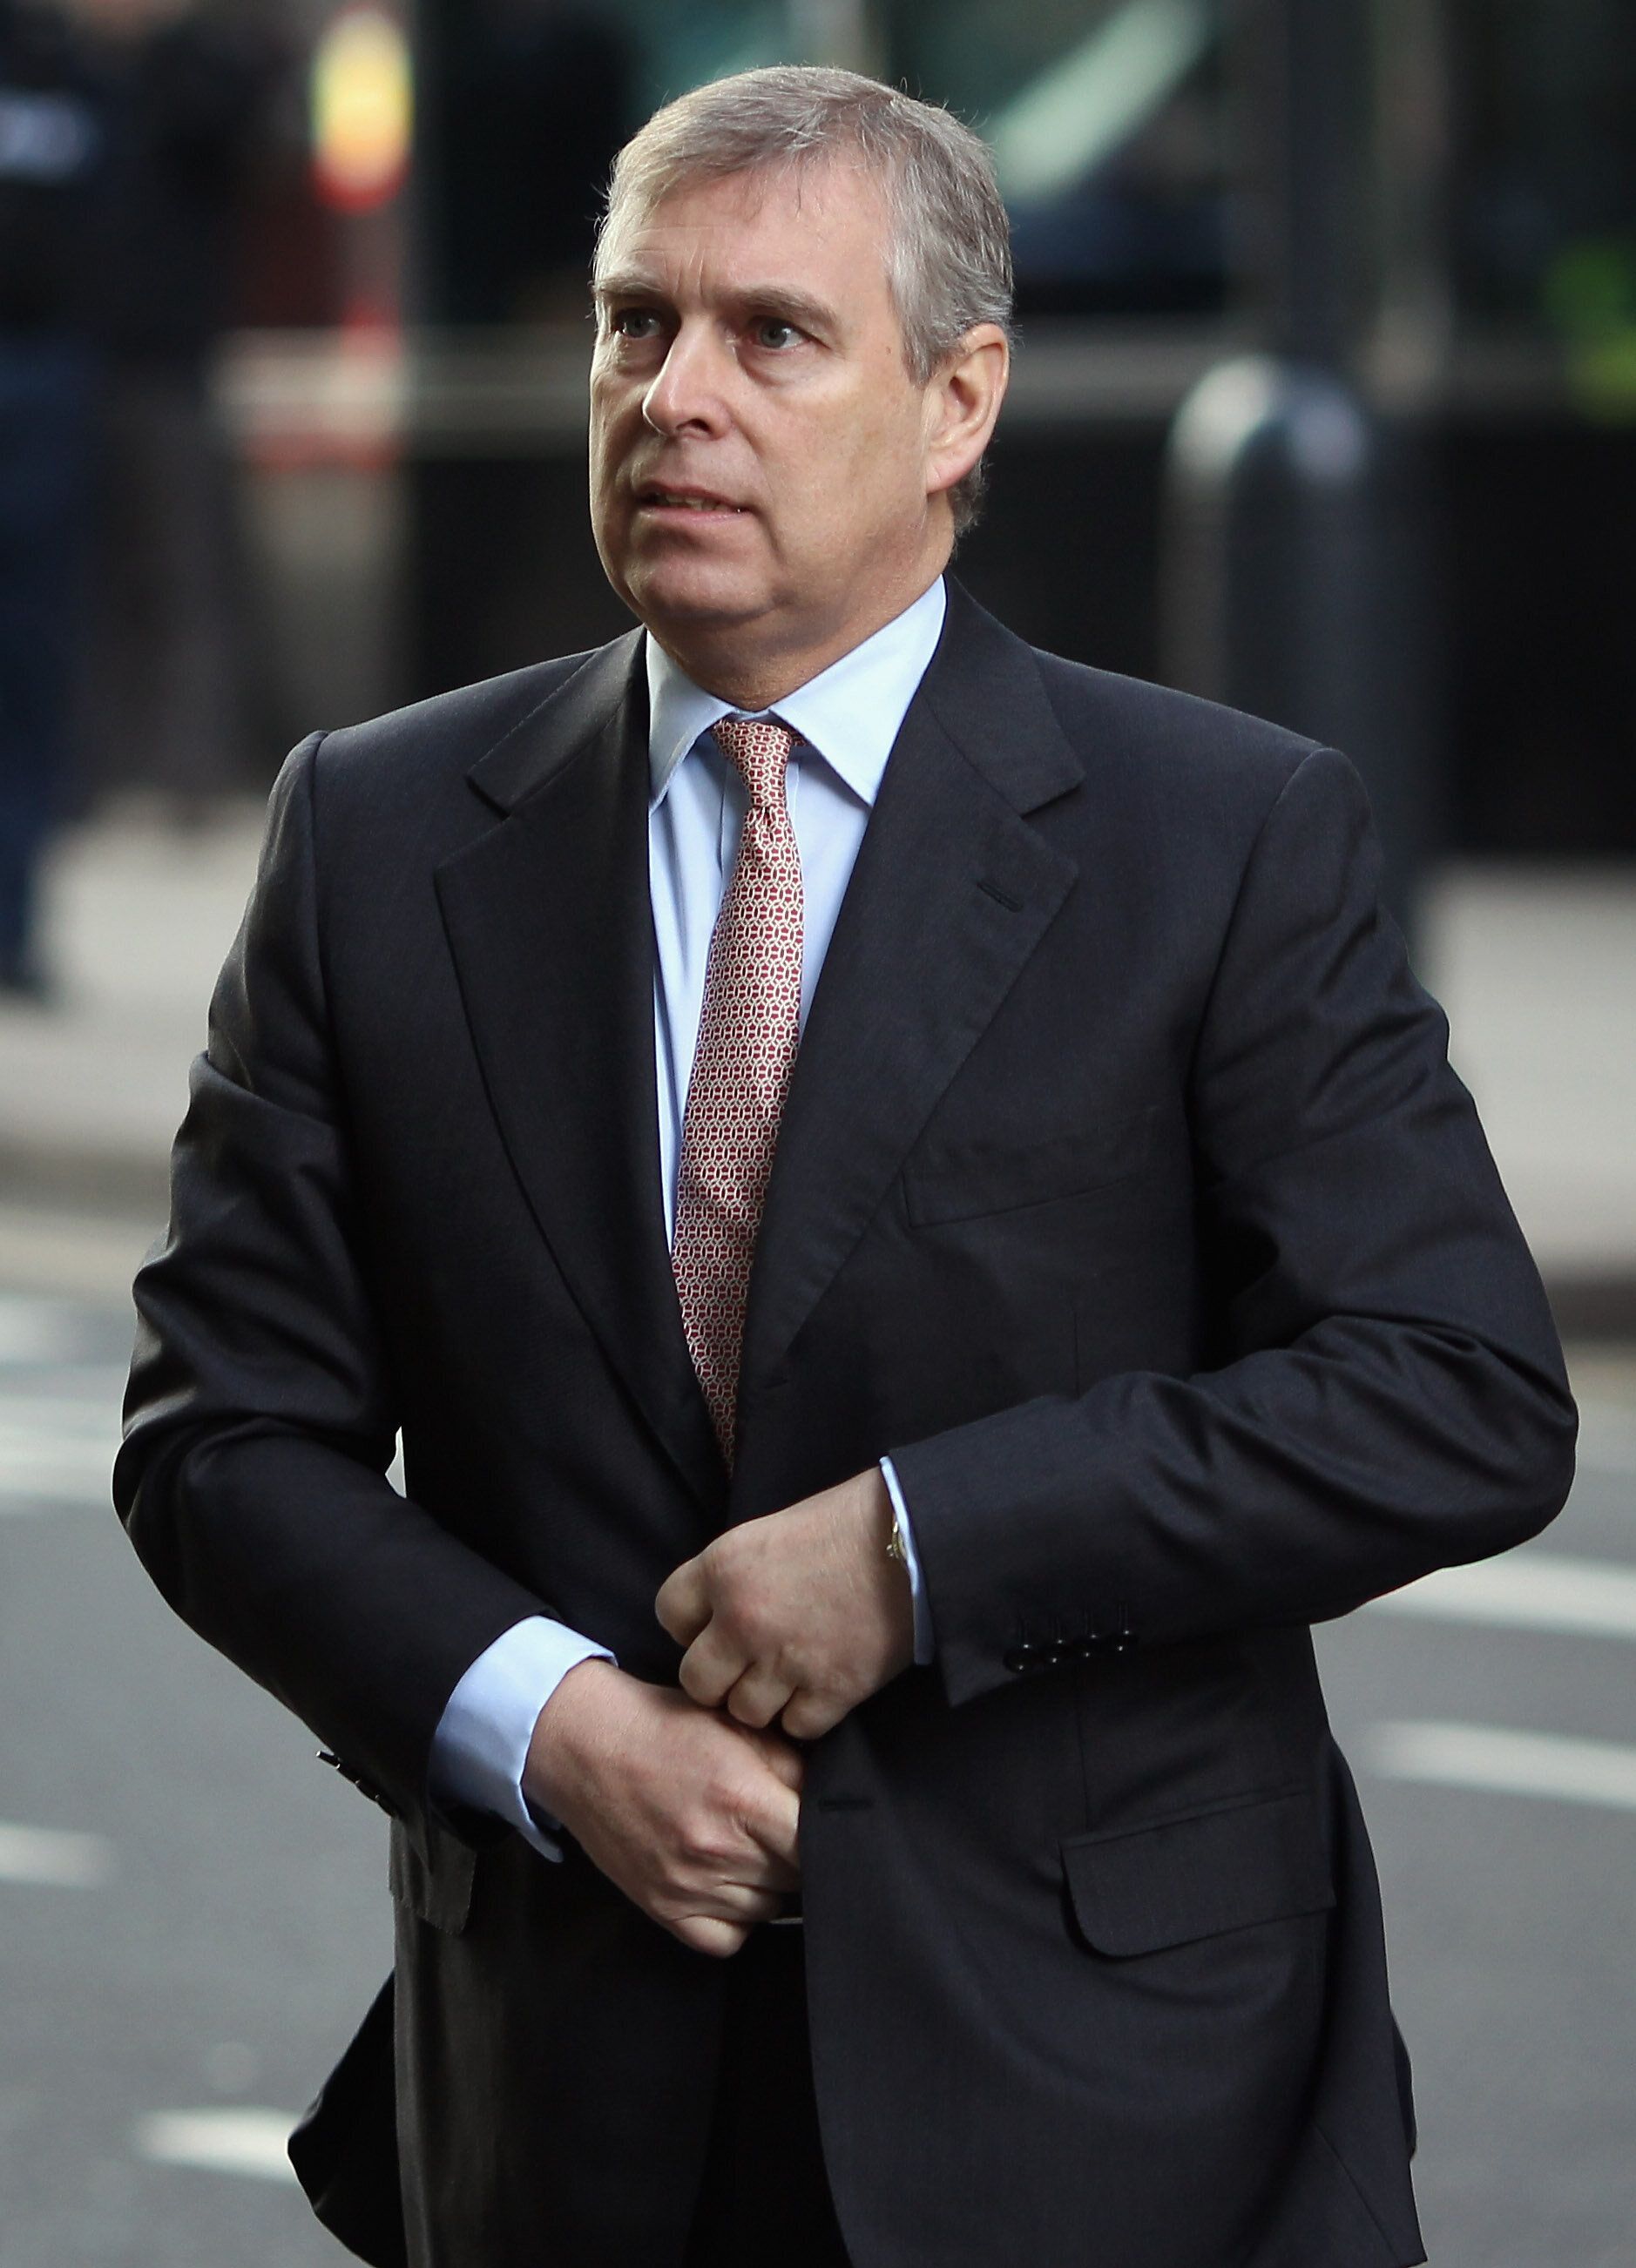 The Duke of York arrives at the Headquarters of CrossRail in Canary Wharf on March 7, 2011 in London, England.&nbsp;